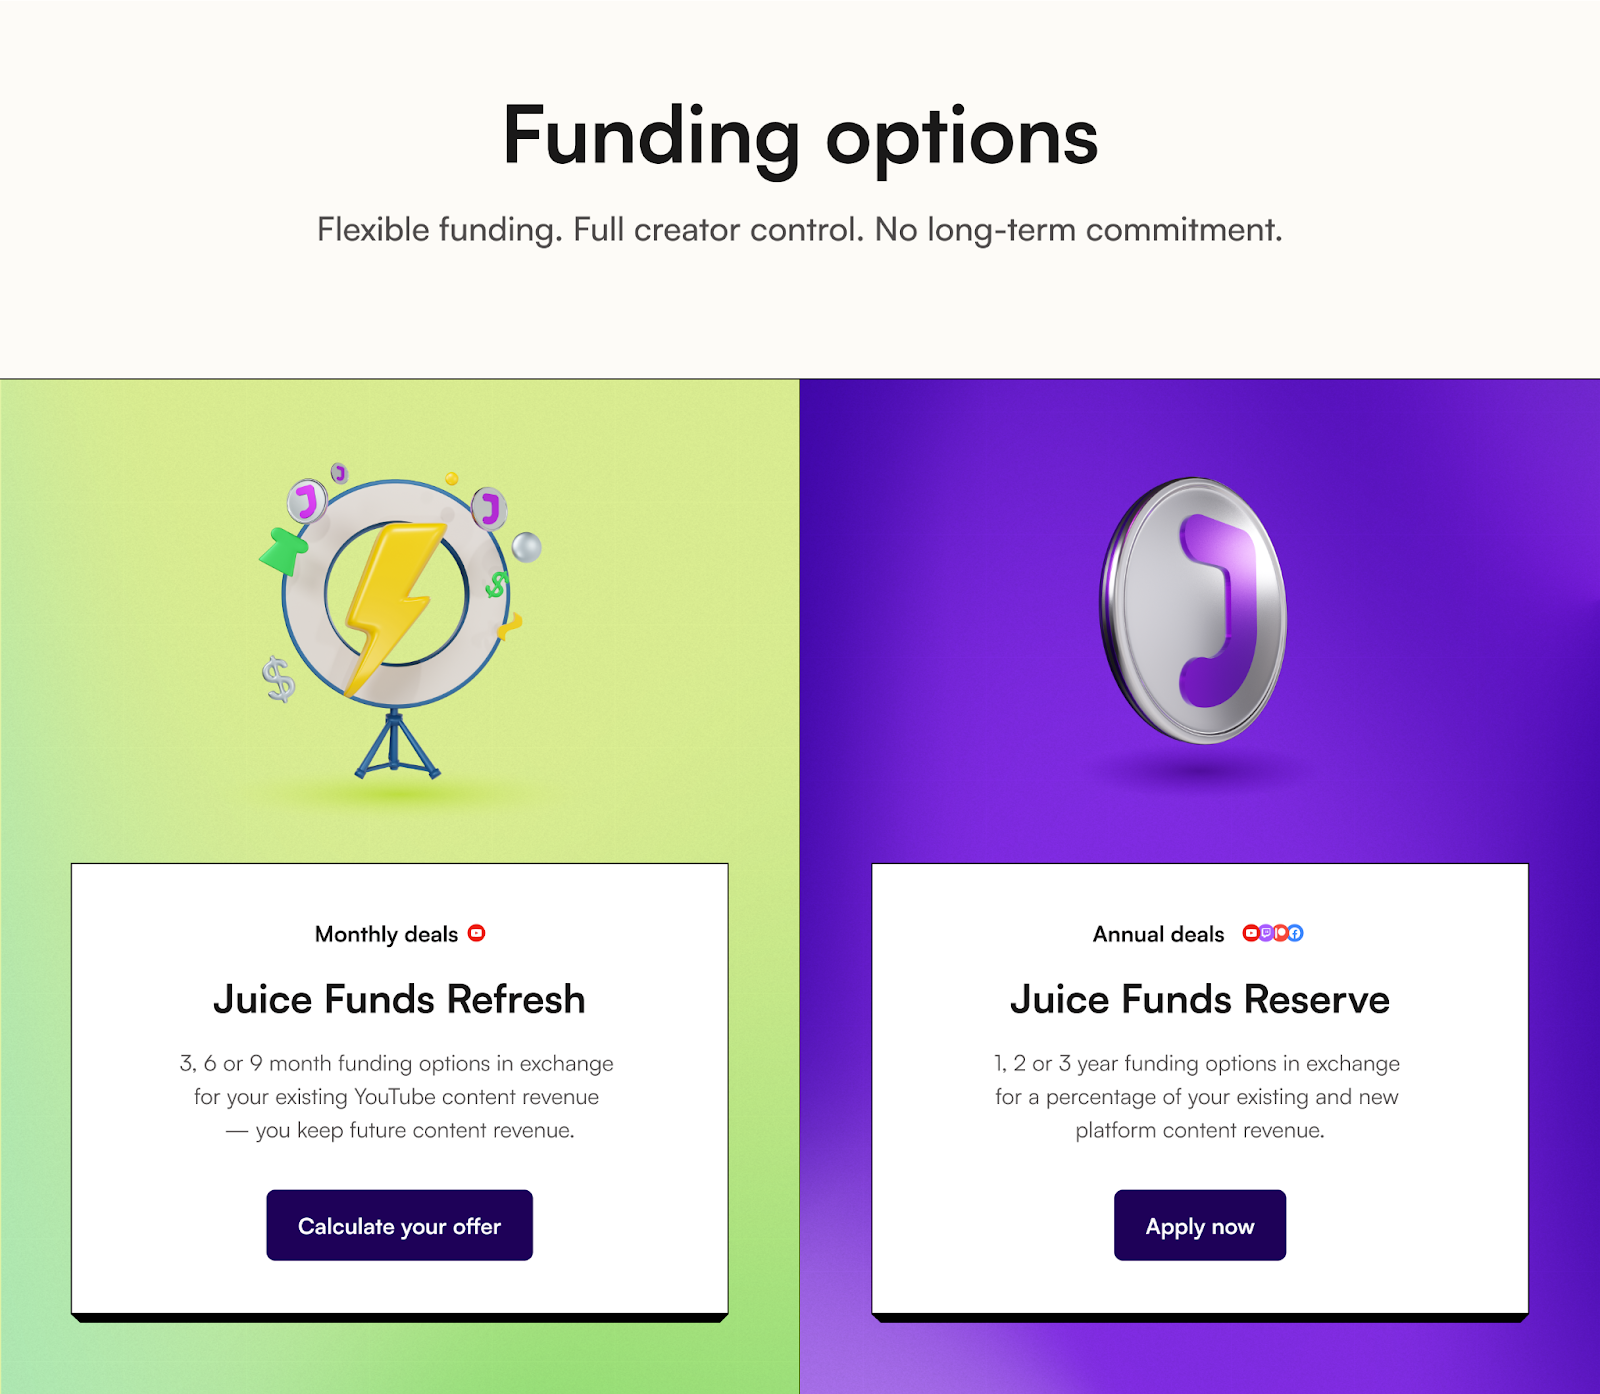 Dustin Blank: Creative Juice Launches Improved Funding Options, Juice Funds Refresh 